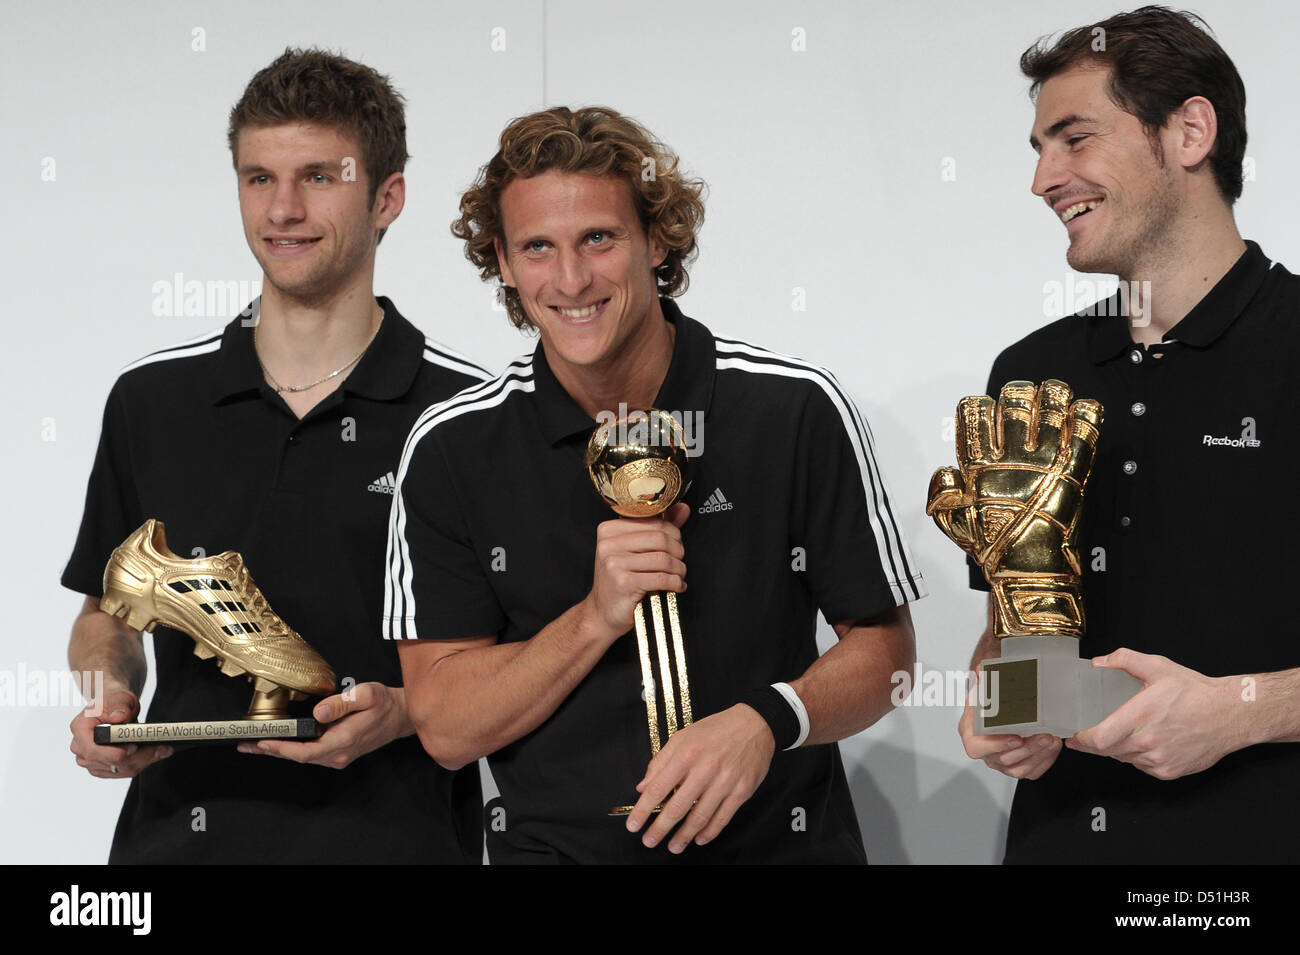 The laureates of the FIFA World Cup 2010 awards pose with their trophies (L-R) Thomas Mueller with Golden Boot for best goalgetter, Diego Forlan with Golden Ball for best player, and Iker Casillas with Golden Glove for best goalkeeper at the FIFA World Cup 2010 awards in Herzogenaurach, Germany, 14 December 2010. Apparently, Diego Forlan receives the Golden Ball, Iker Casillas the  Stock Photo